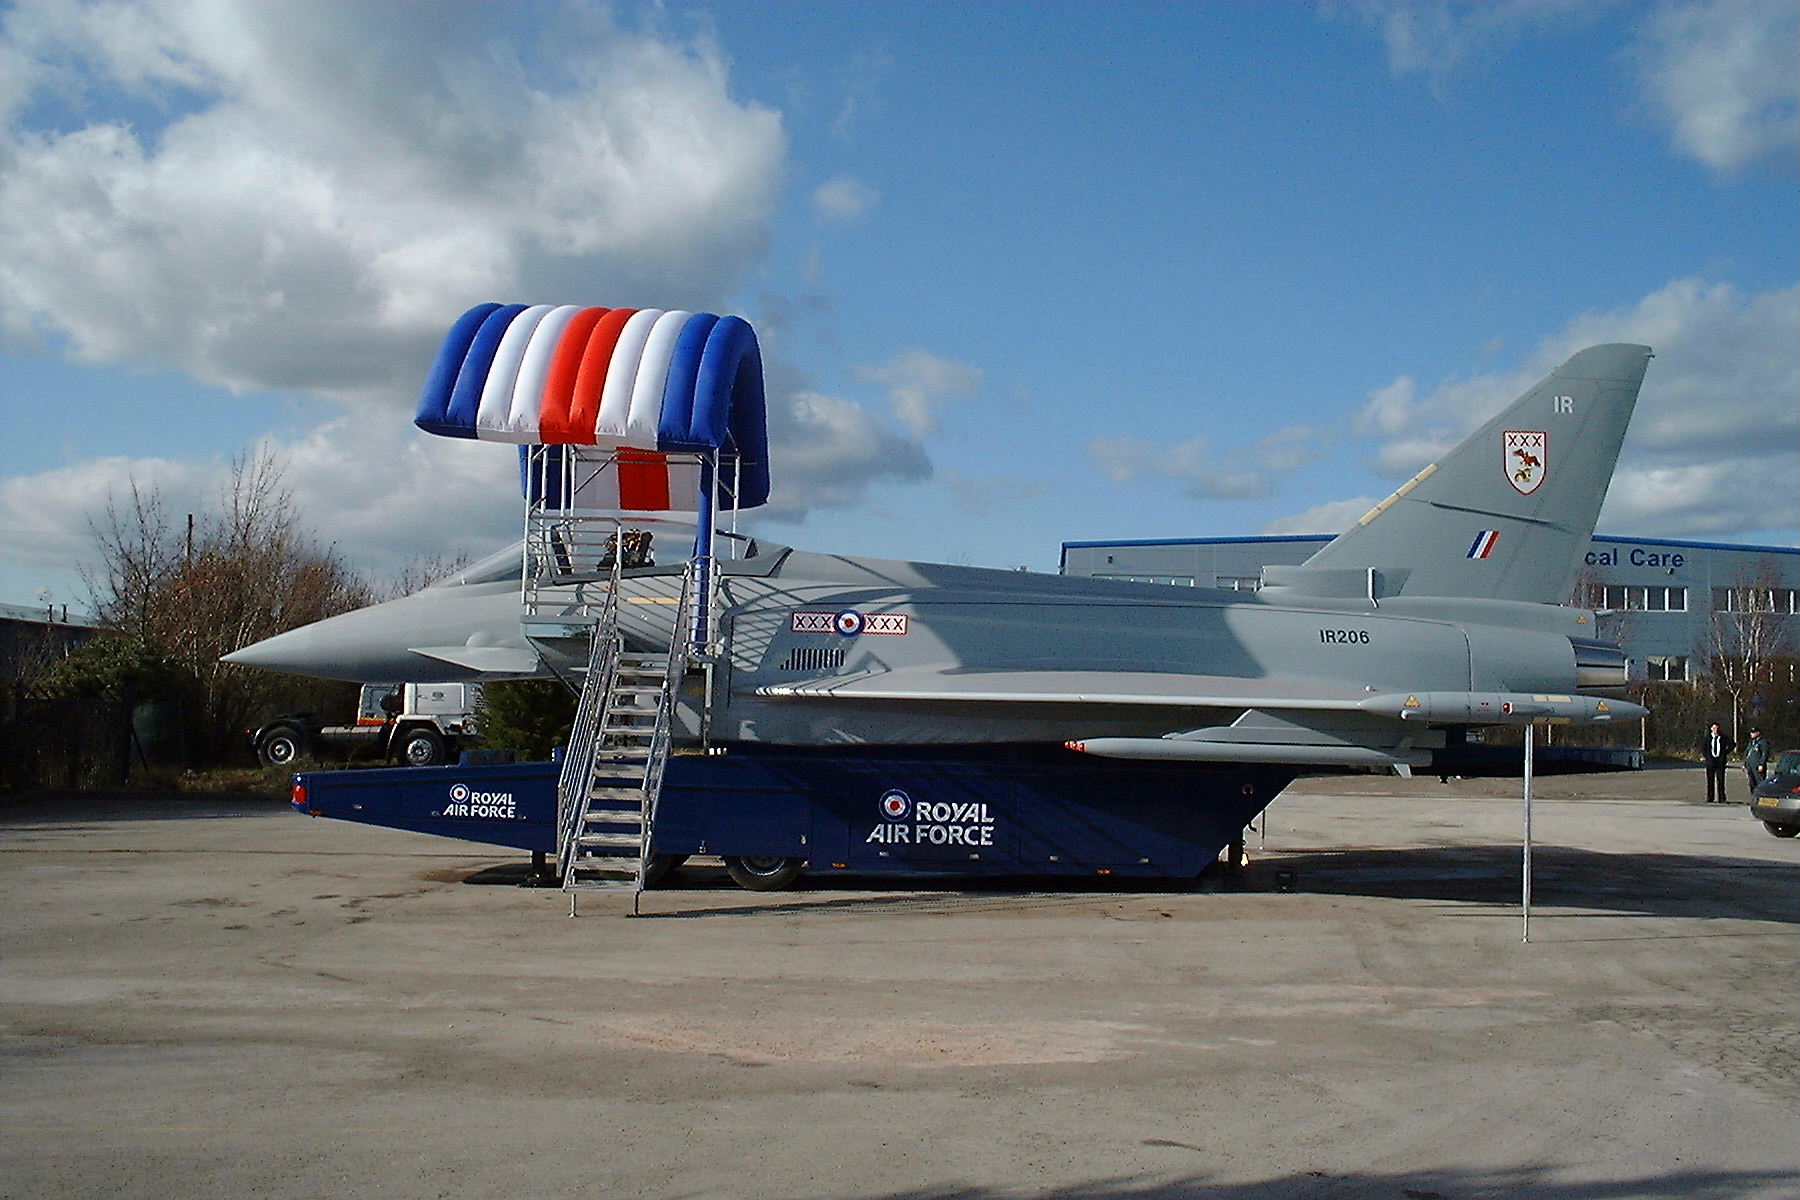 Sde-View-of-the-RAF-Eurofighter-with-air-cover-deployed-over-cockpit